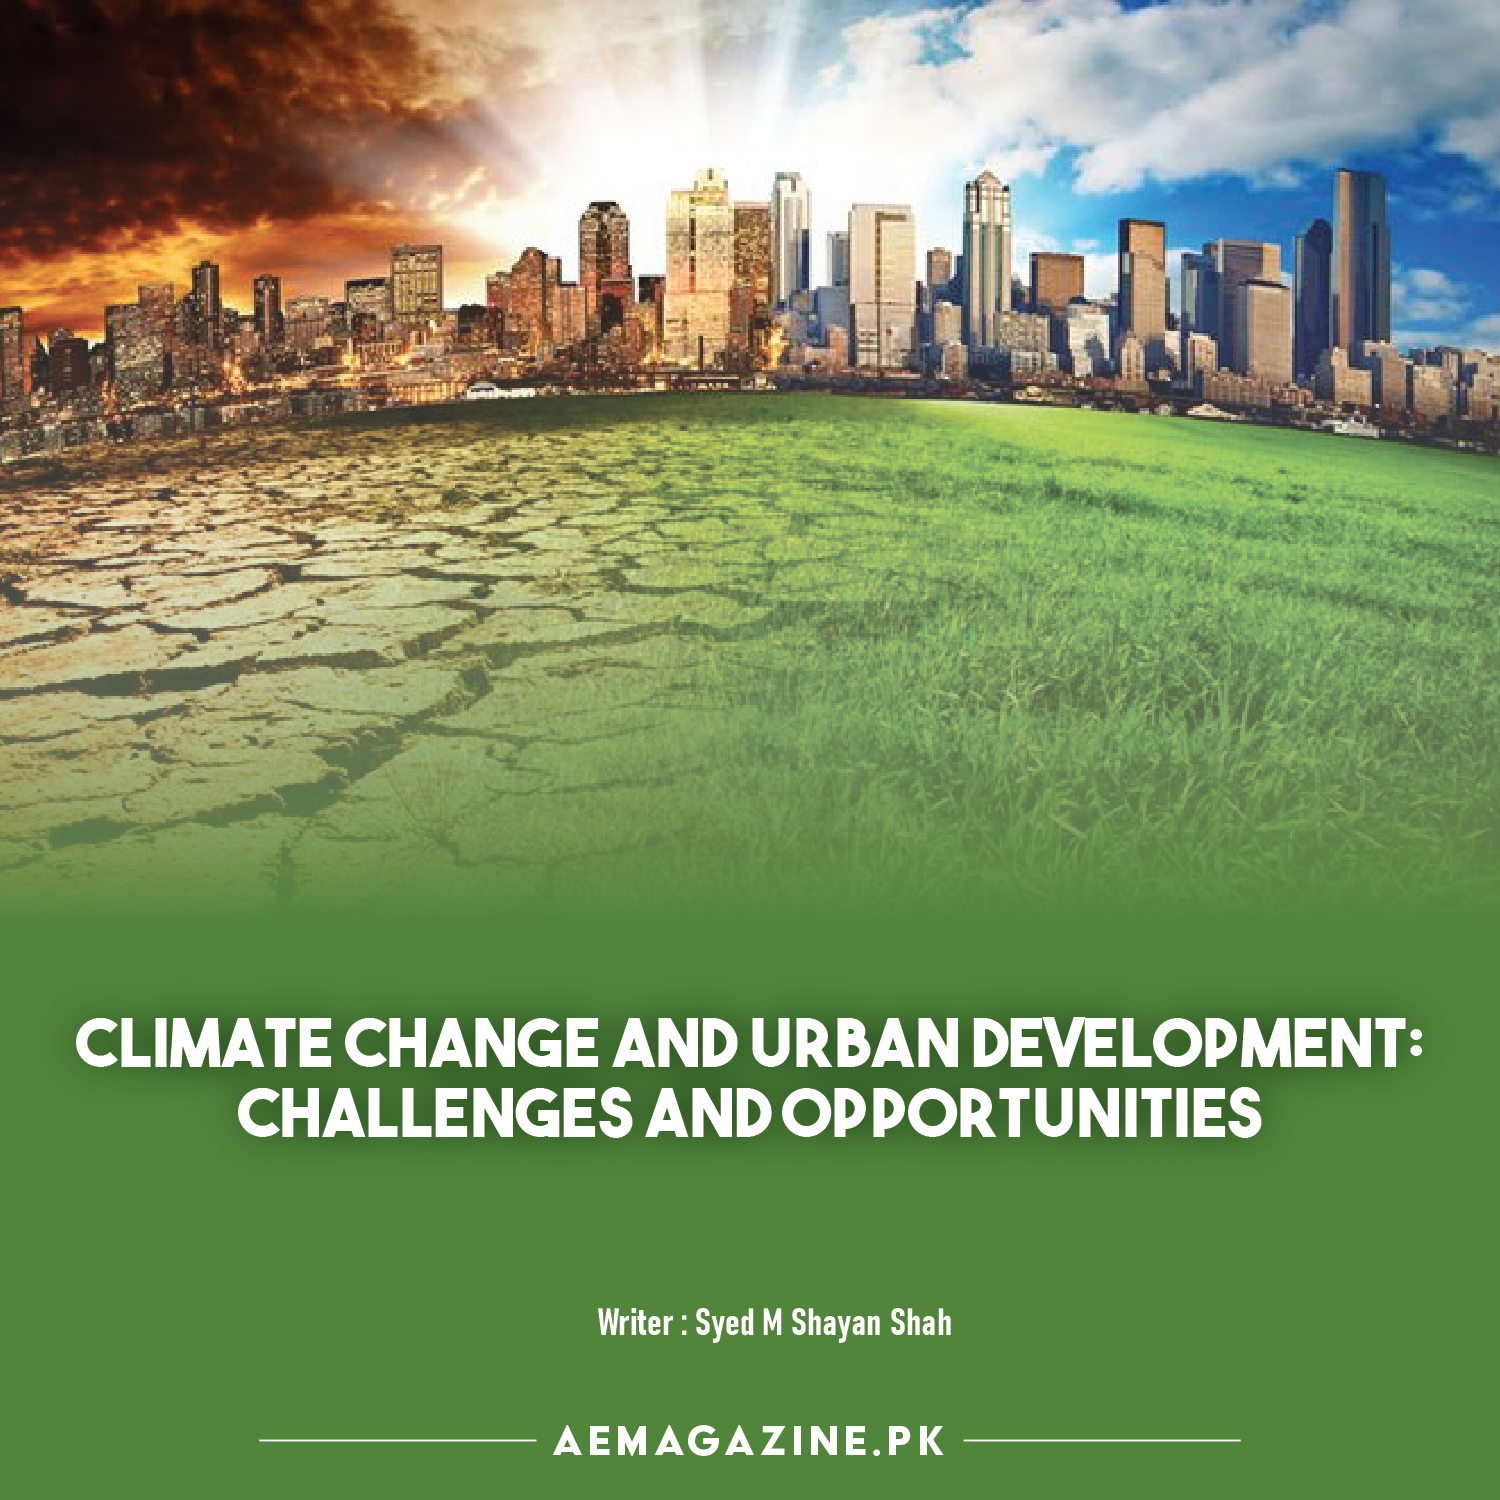 Climate Change and Urban Development: Challenges and Opportunities